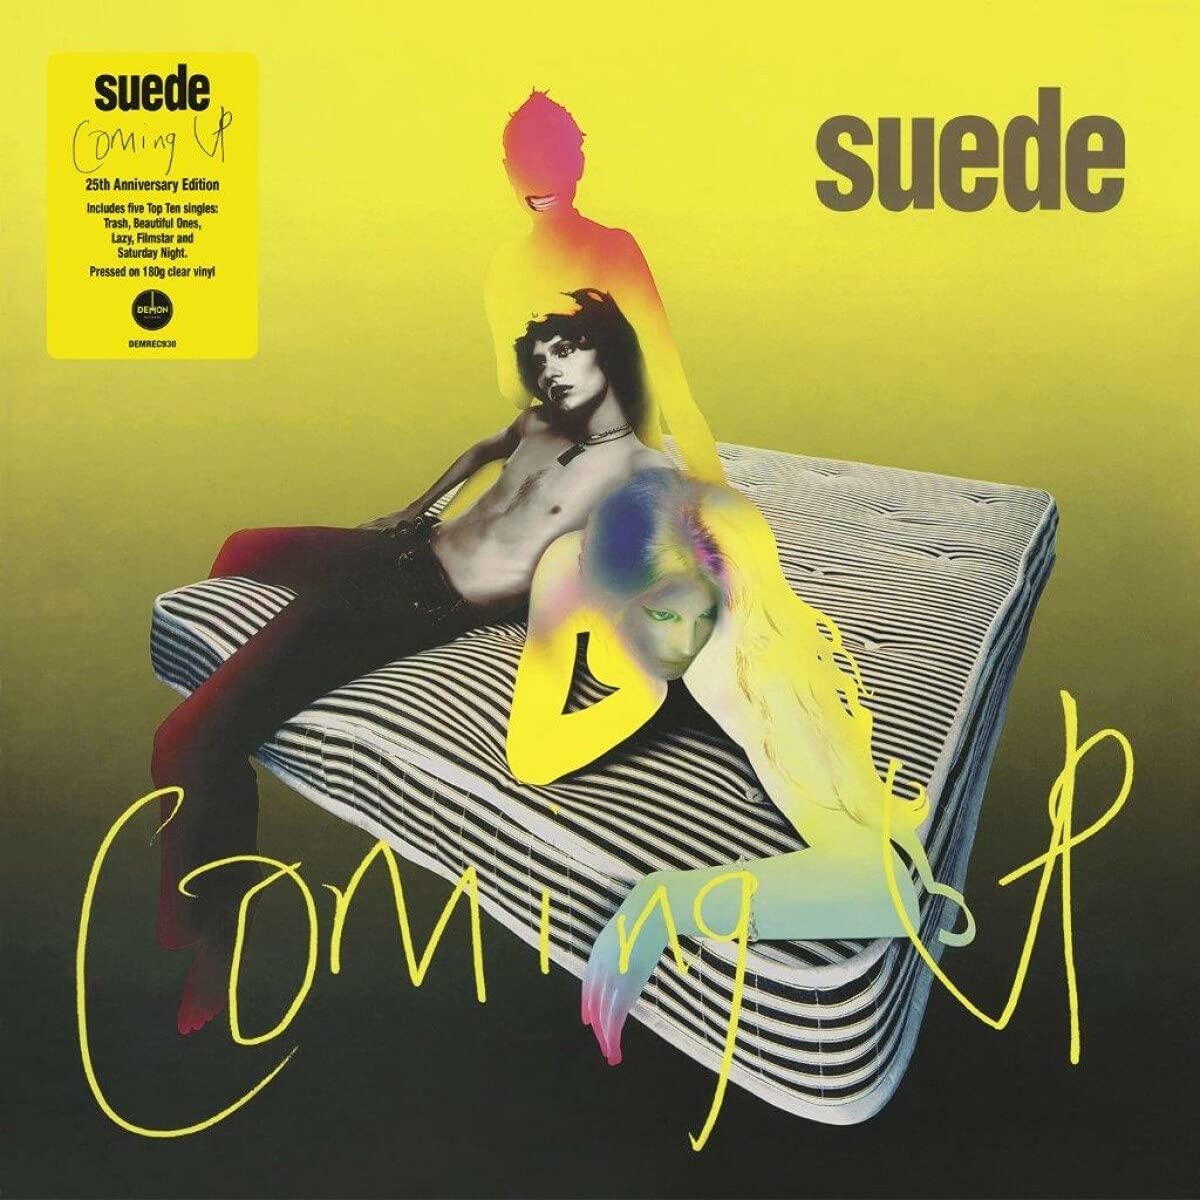 Suede - Coming Up (25th Anniversary - 180g Clear Vinyl)